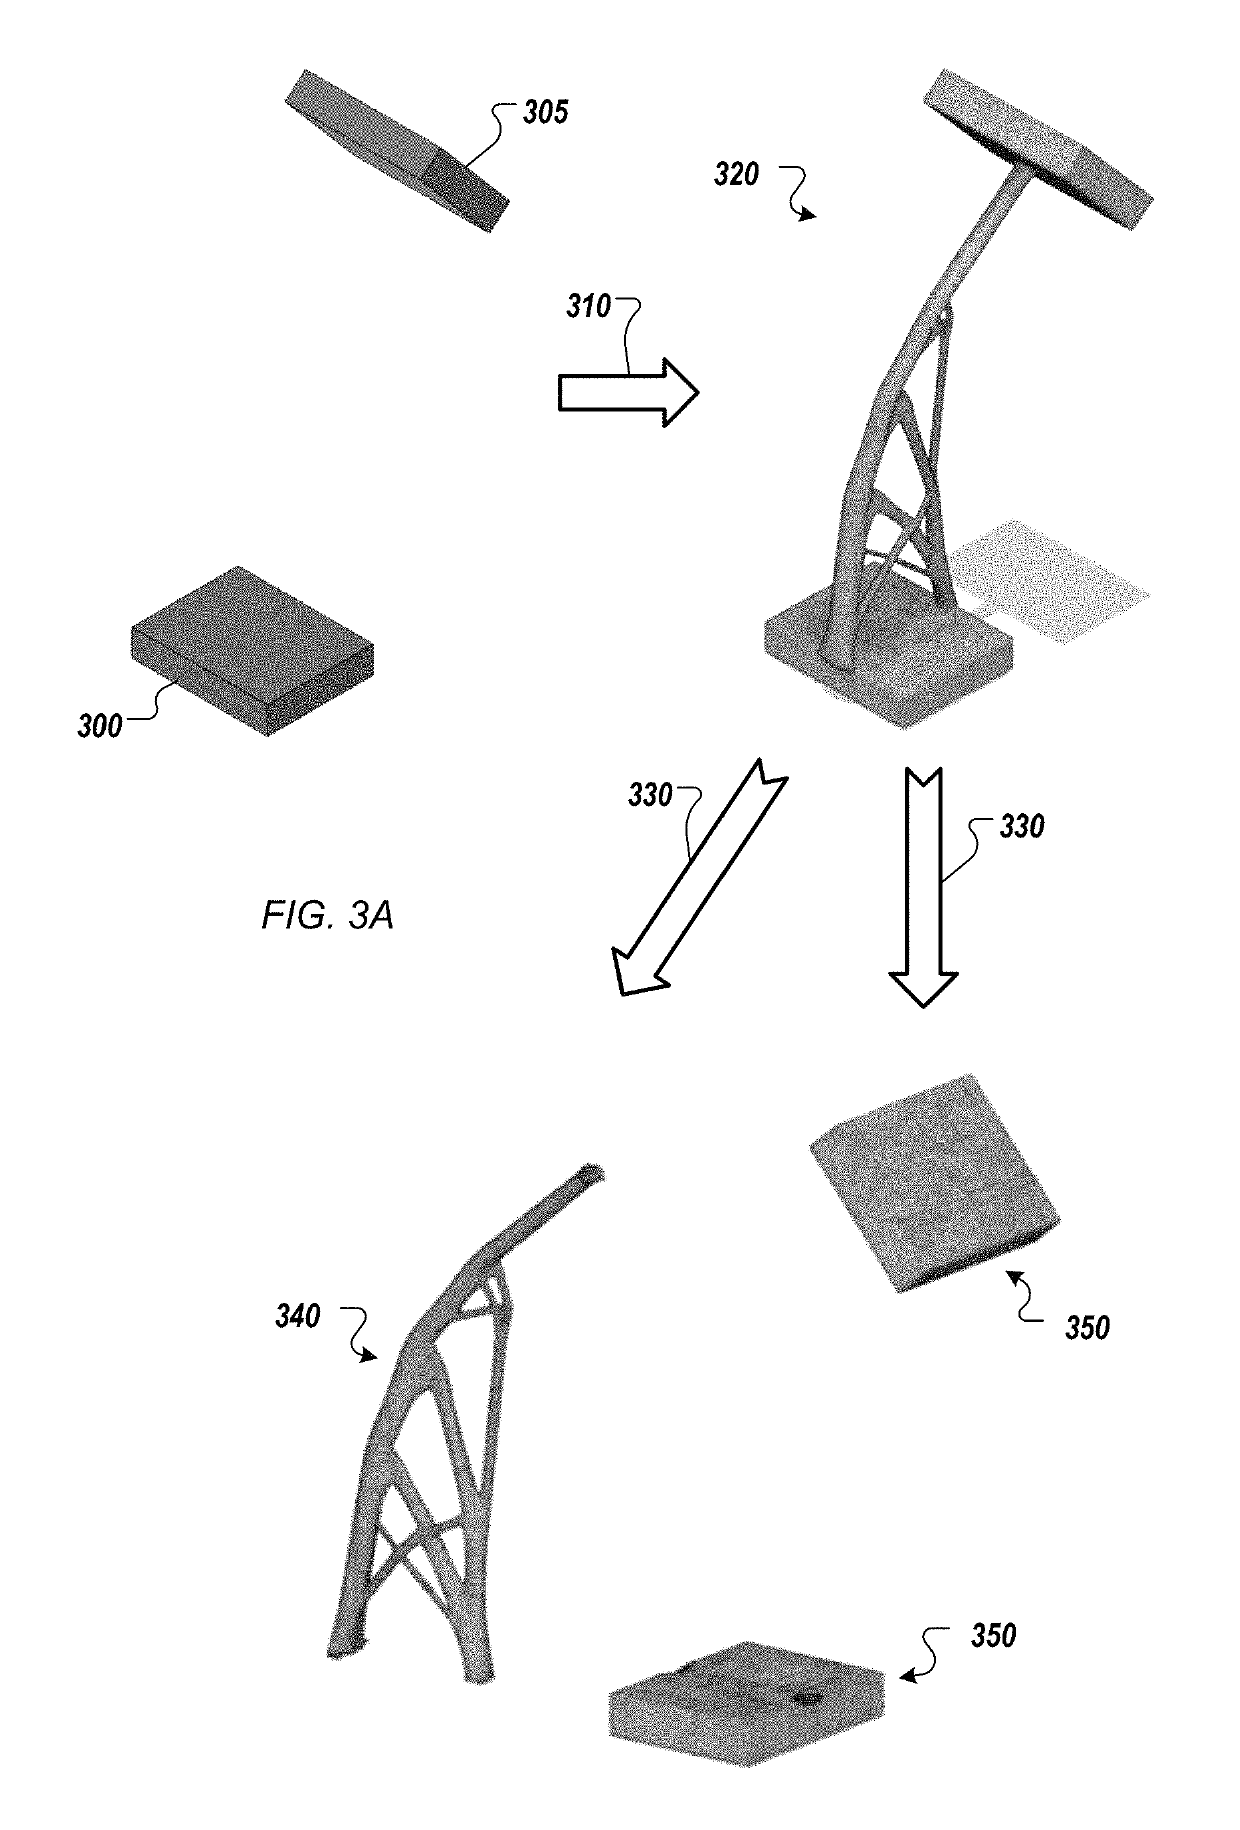 Facilitated editing of generative design geometry in computer aided design user interface